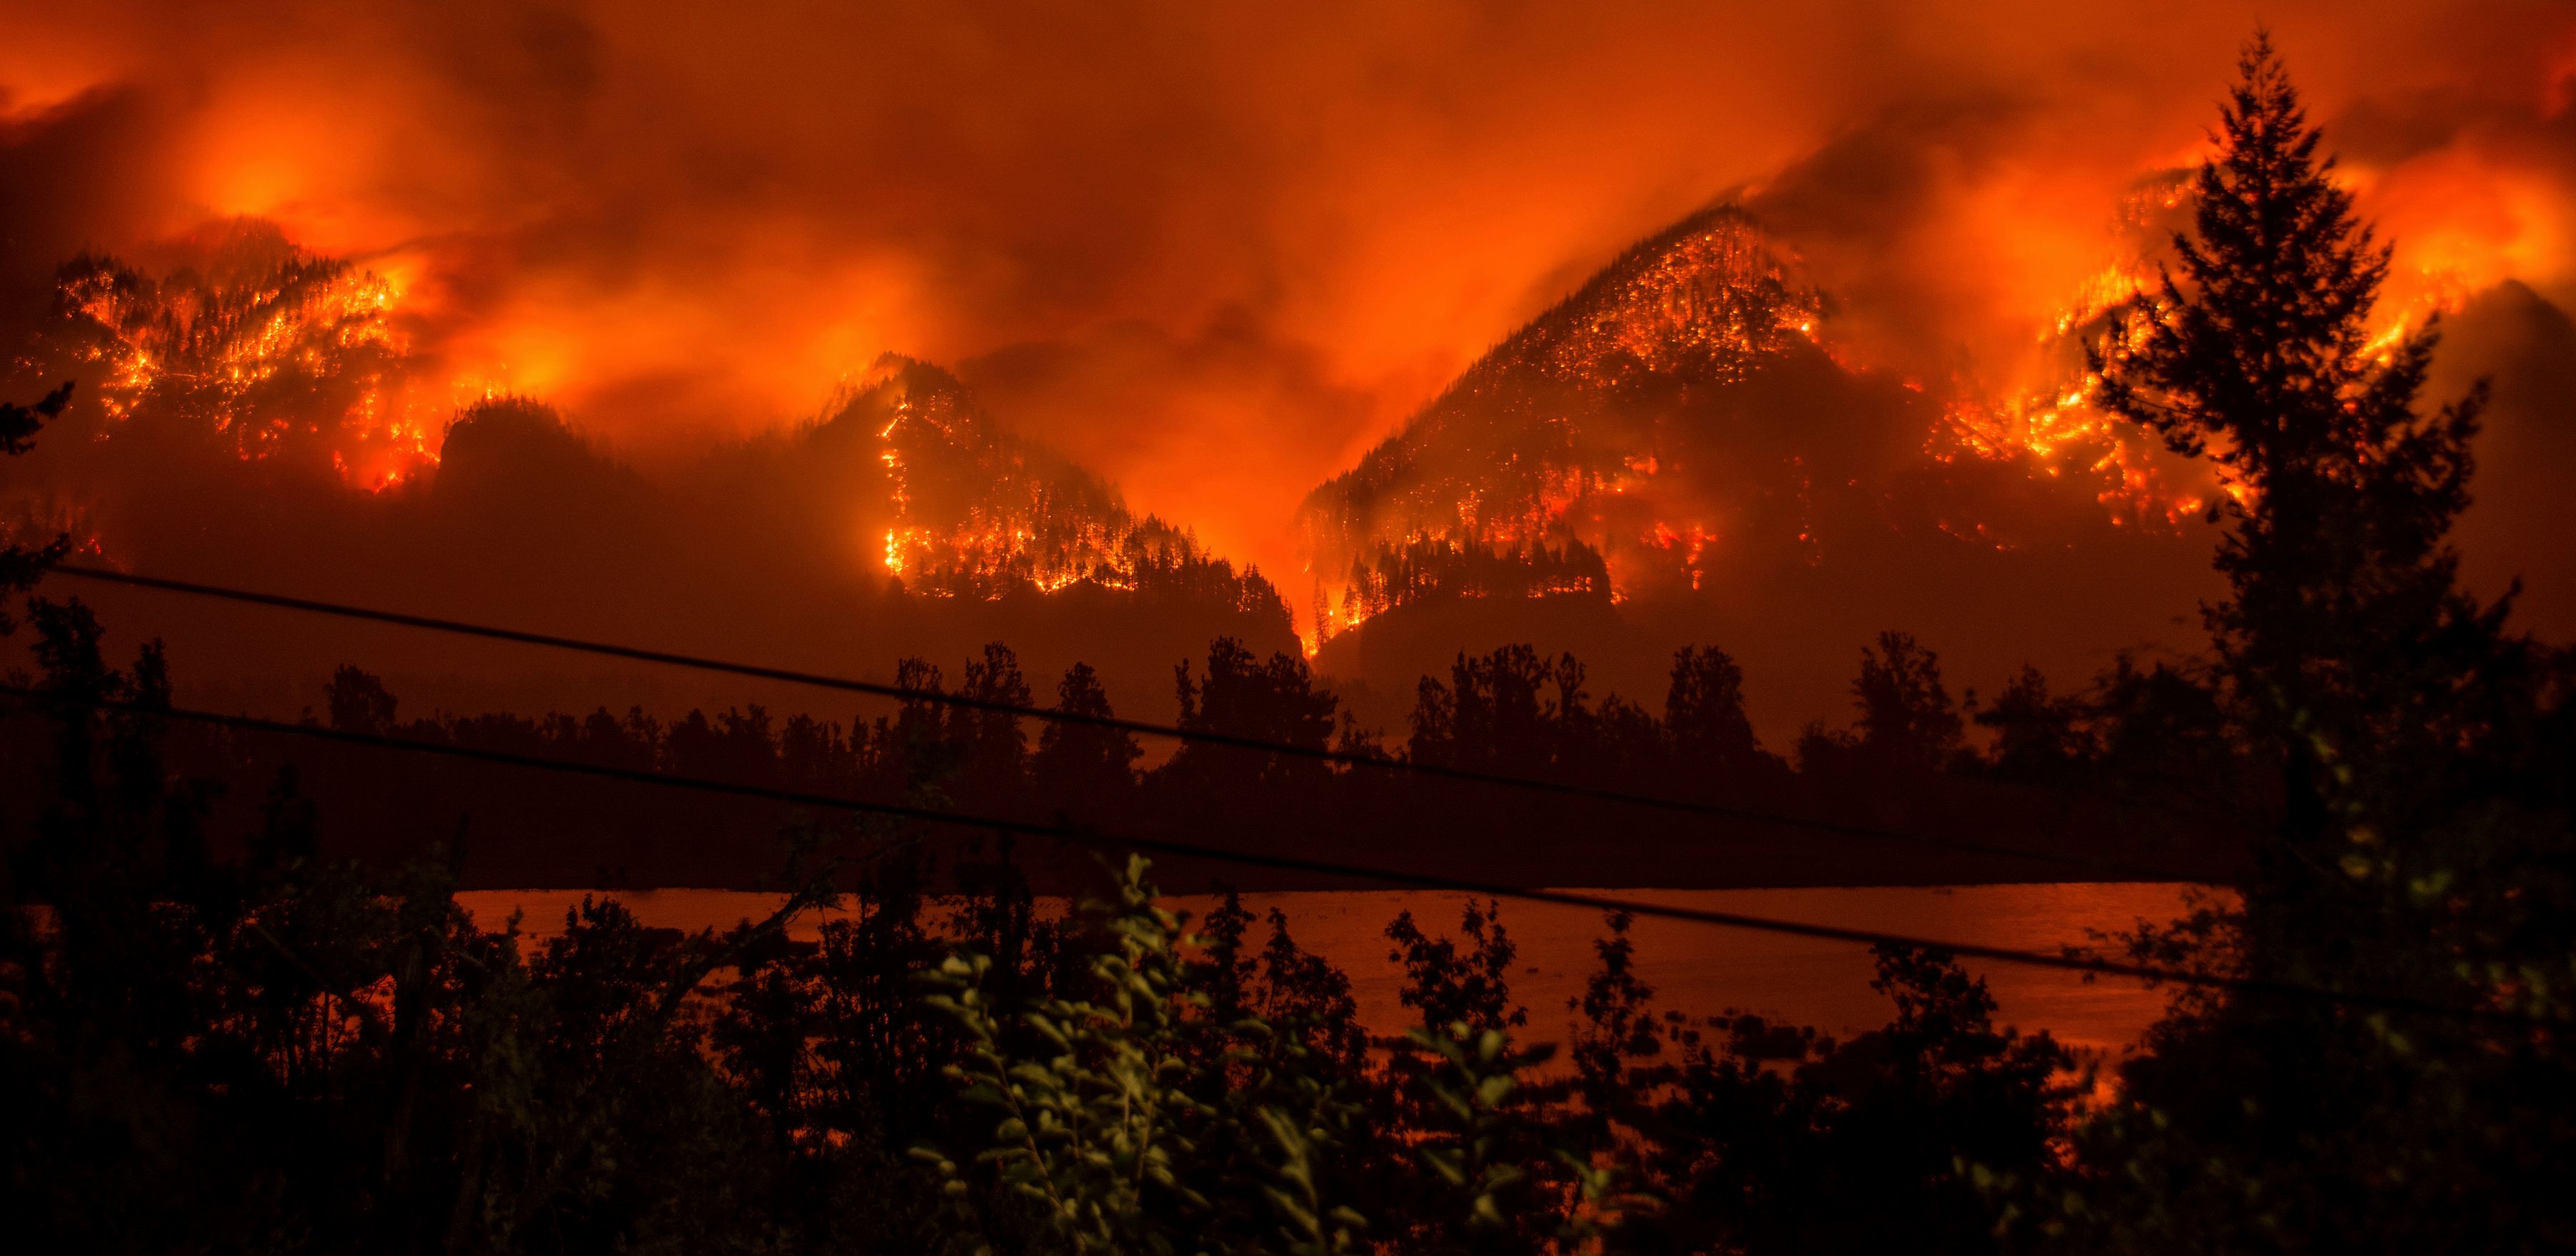 Wildfires 2017: This year's devastating wildfire season in the ...